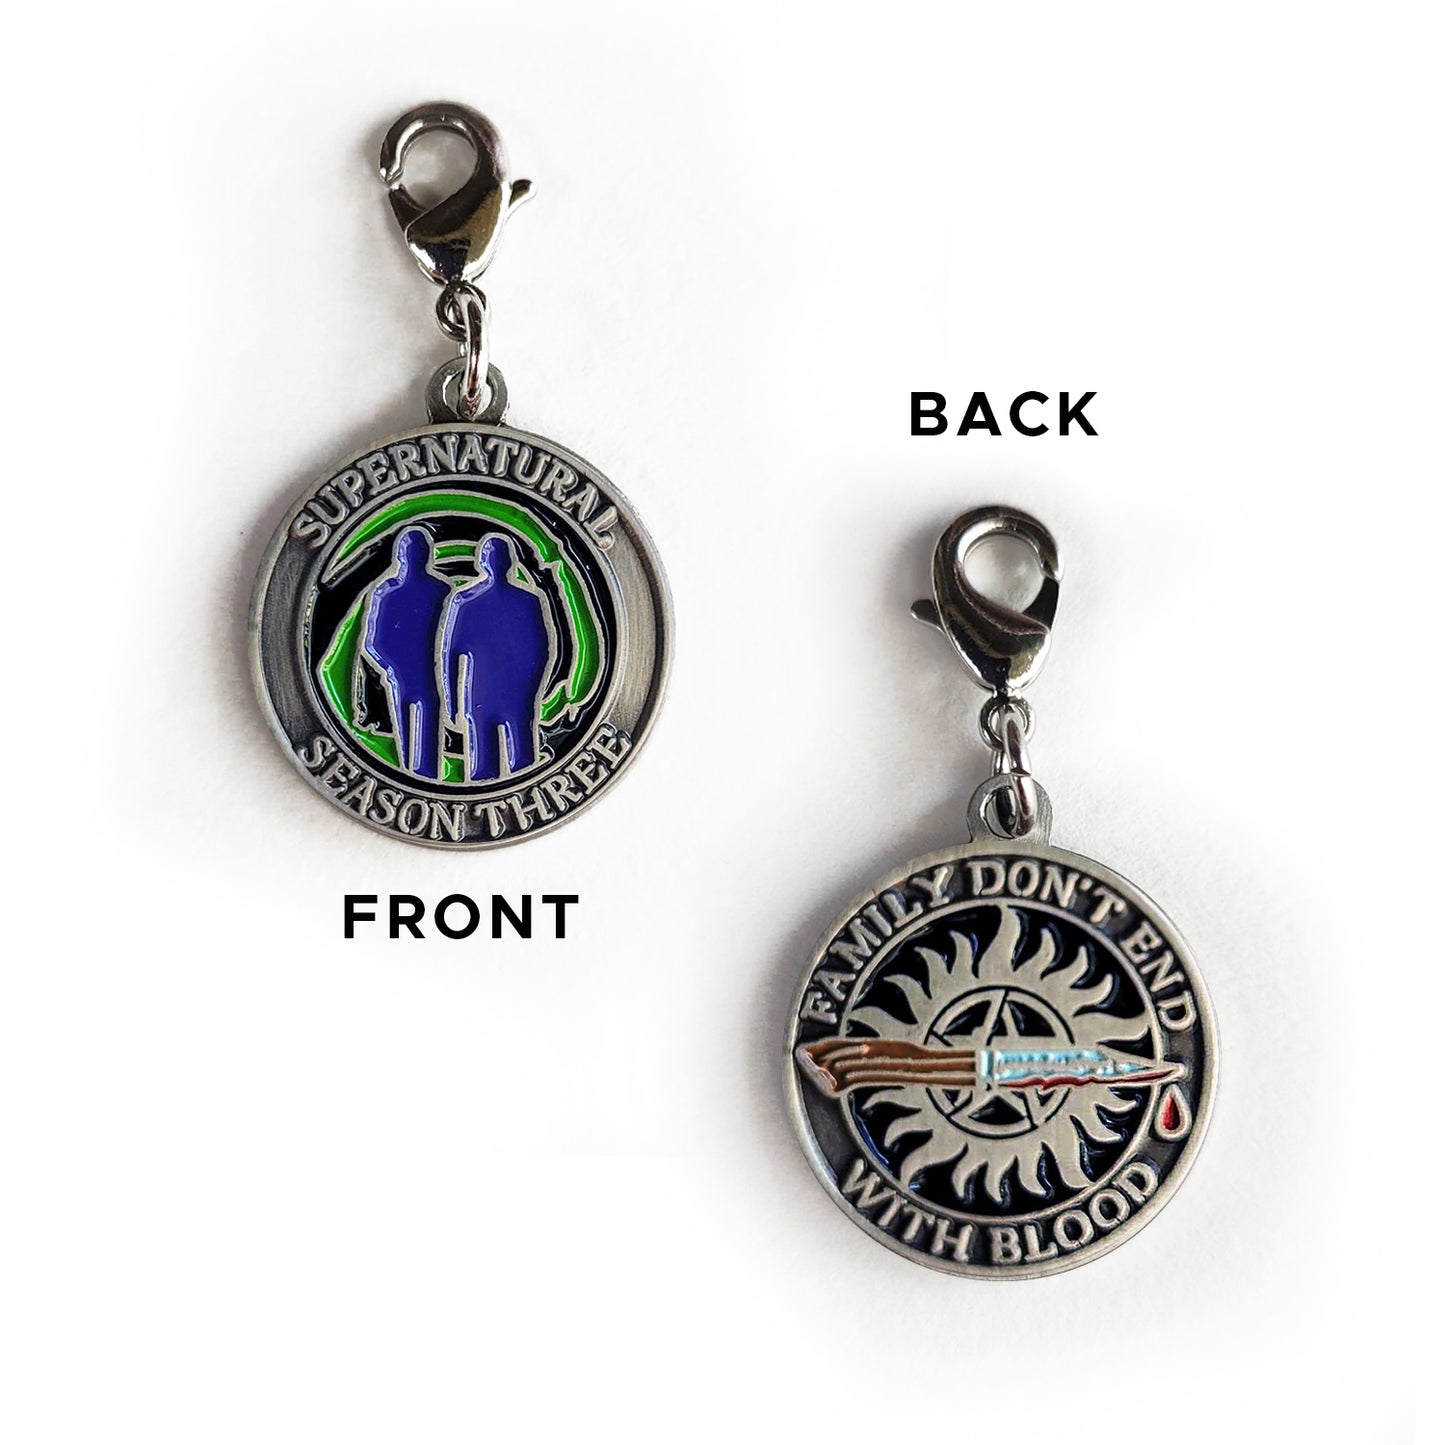 A brass coin charm with "Supernatural season three", a green "Mystery Spot" swirl, and 2 male sillhouettes on one side and "Family Don't End With Blood" with a knife and anti-possession symbol on the other.